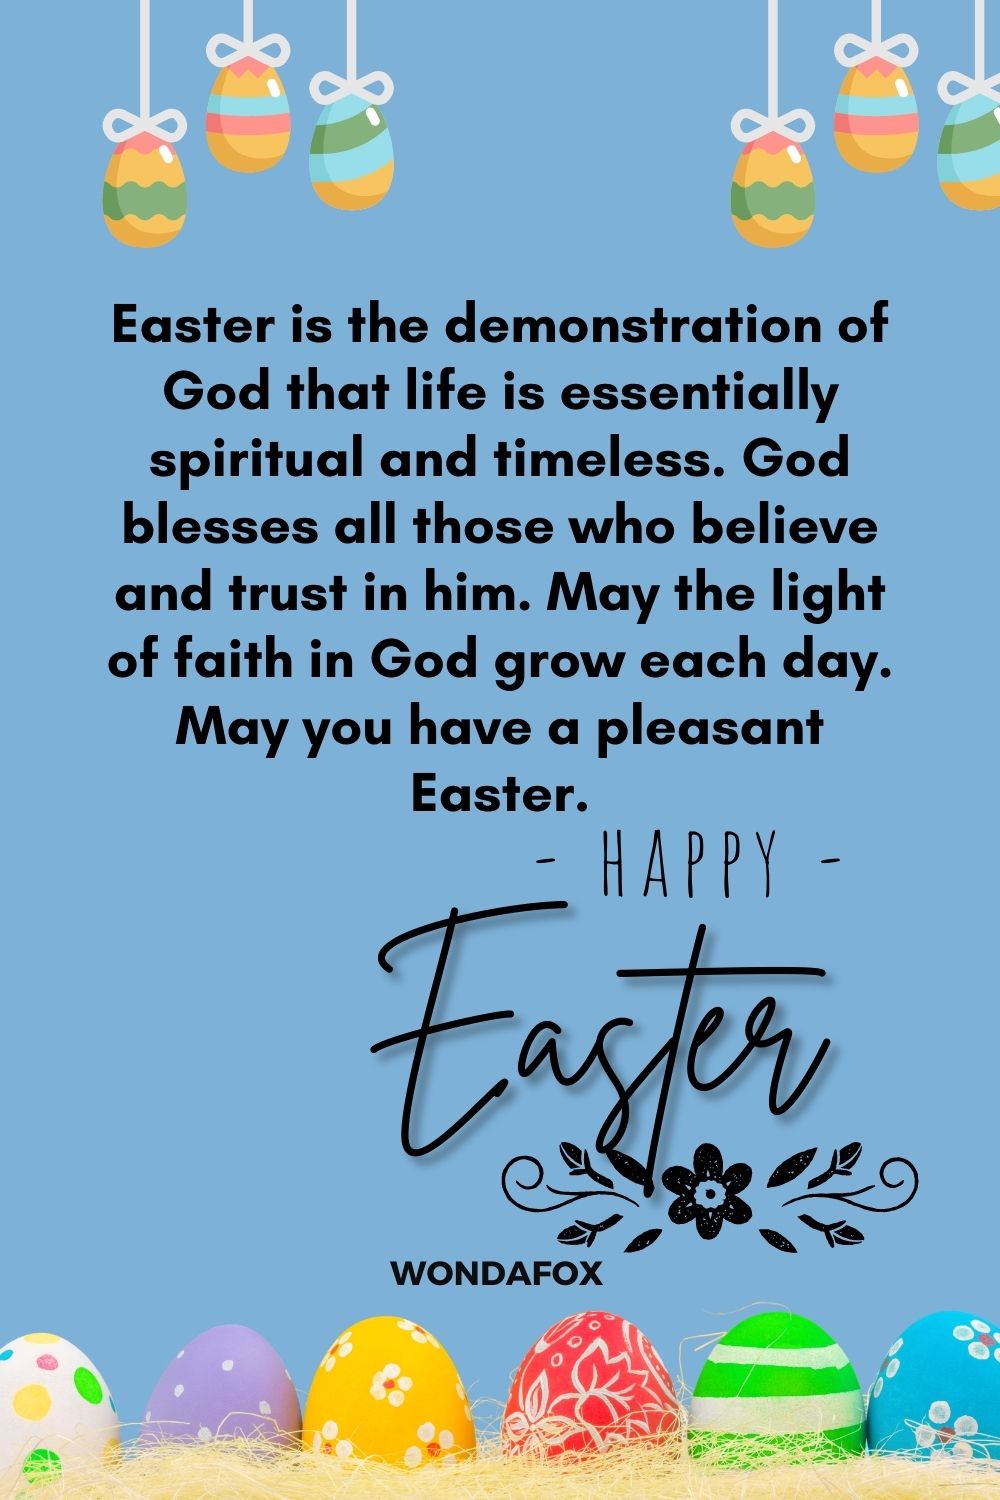 Easter is the demonstration of God that life is essentially spiritual and timeless. God blesses all those who believe and trust in him. May the light of faith in God grow each day. May you have a pleasant Easter.